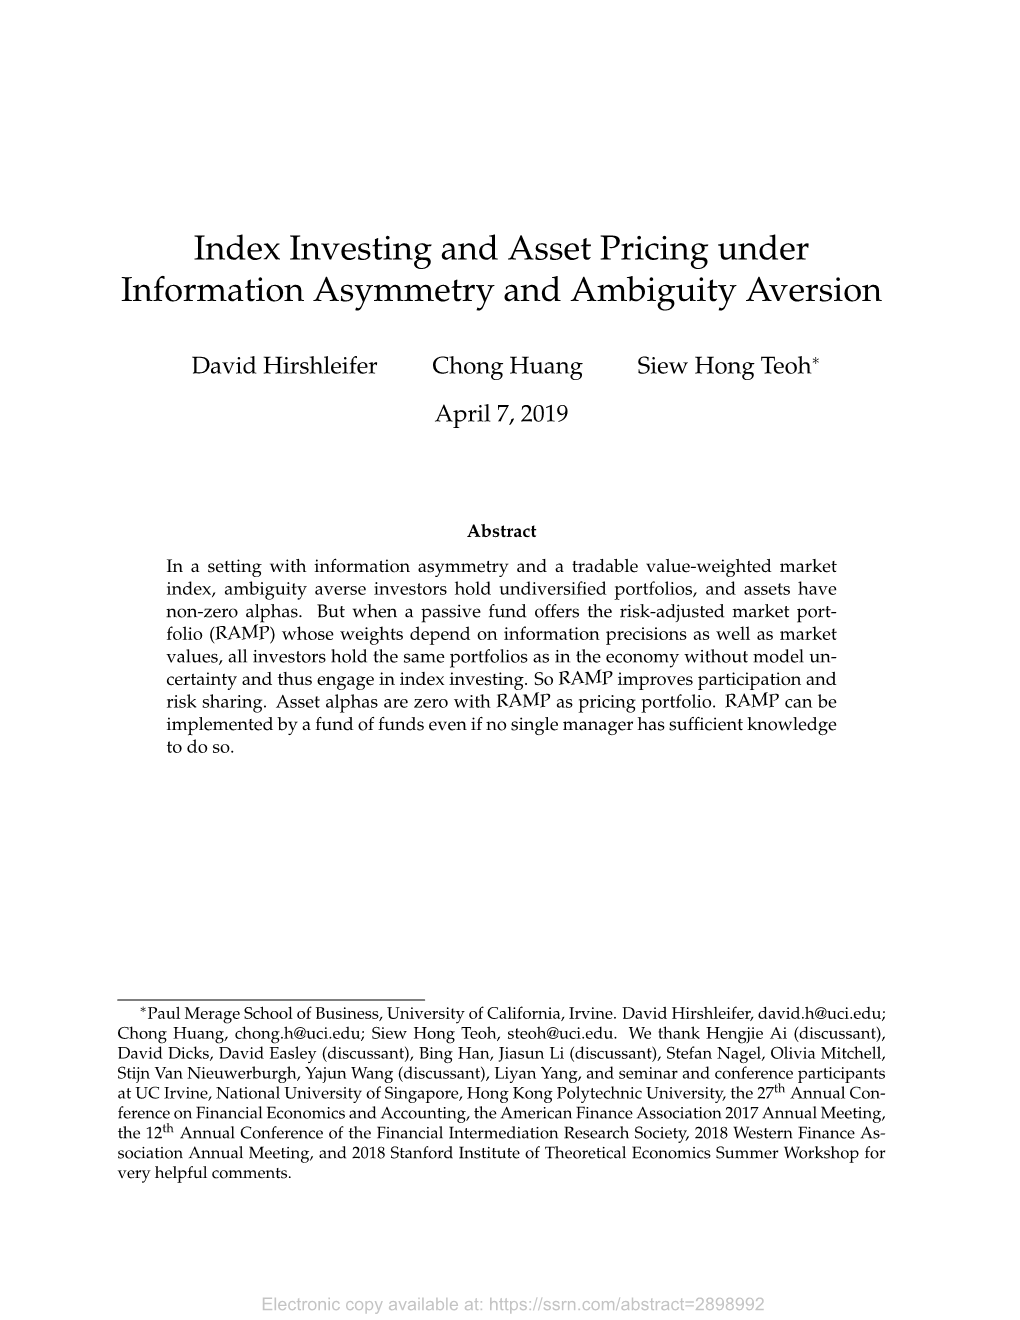 Index Investing and Asset Pricing Under Information Asymmetry and Ambiguity Aversion